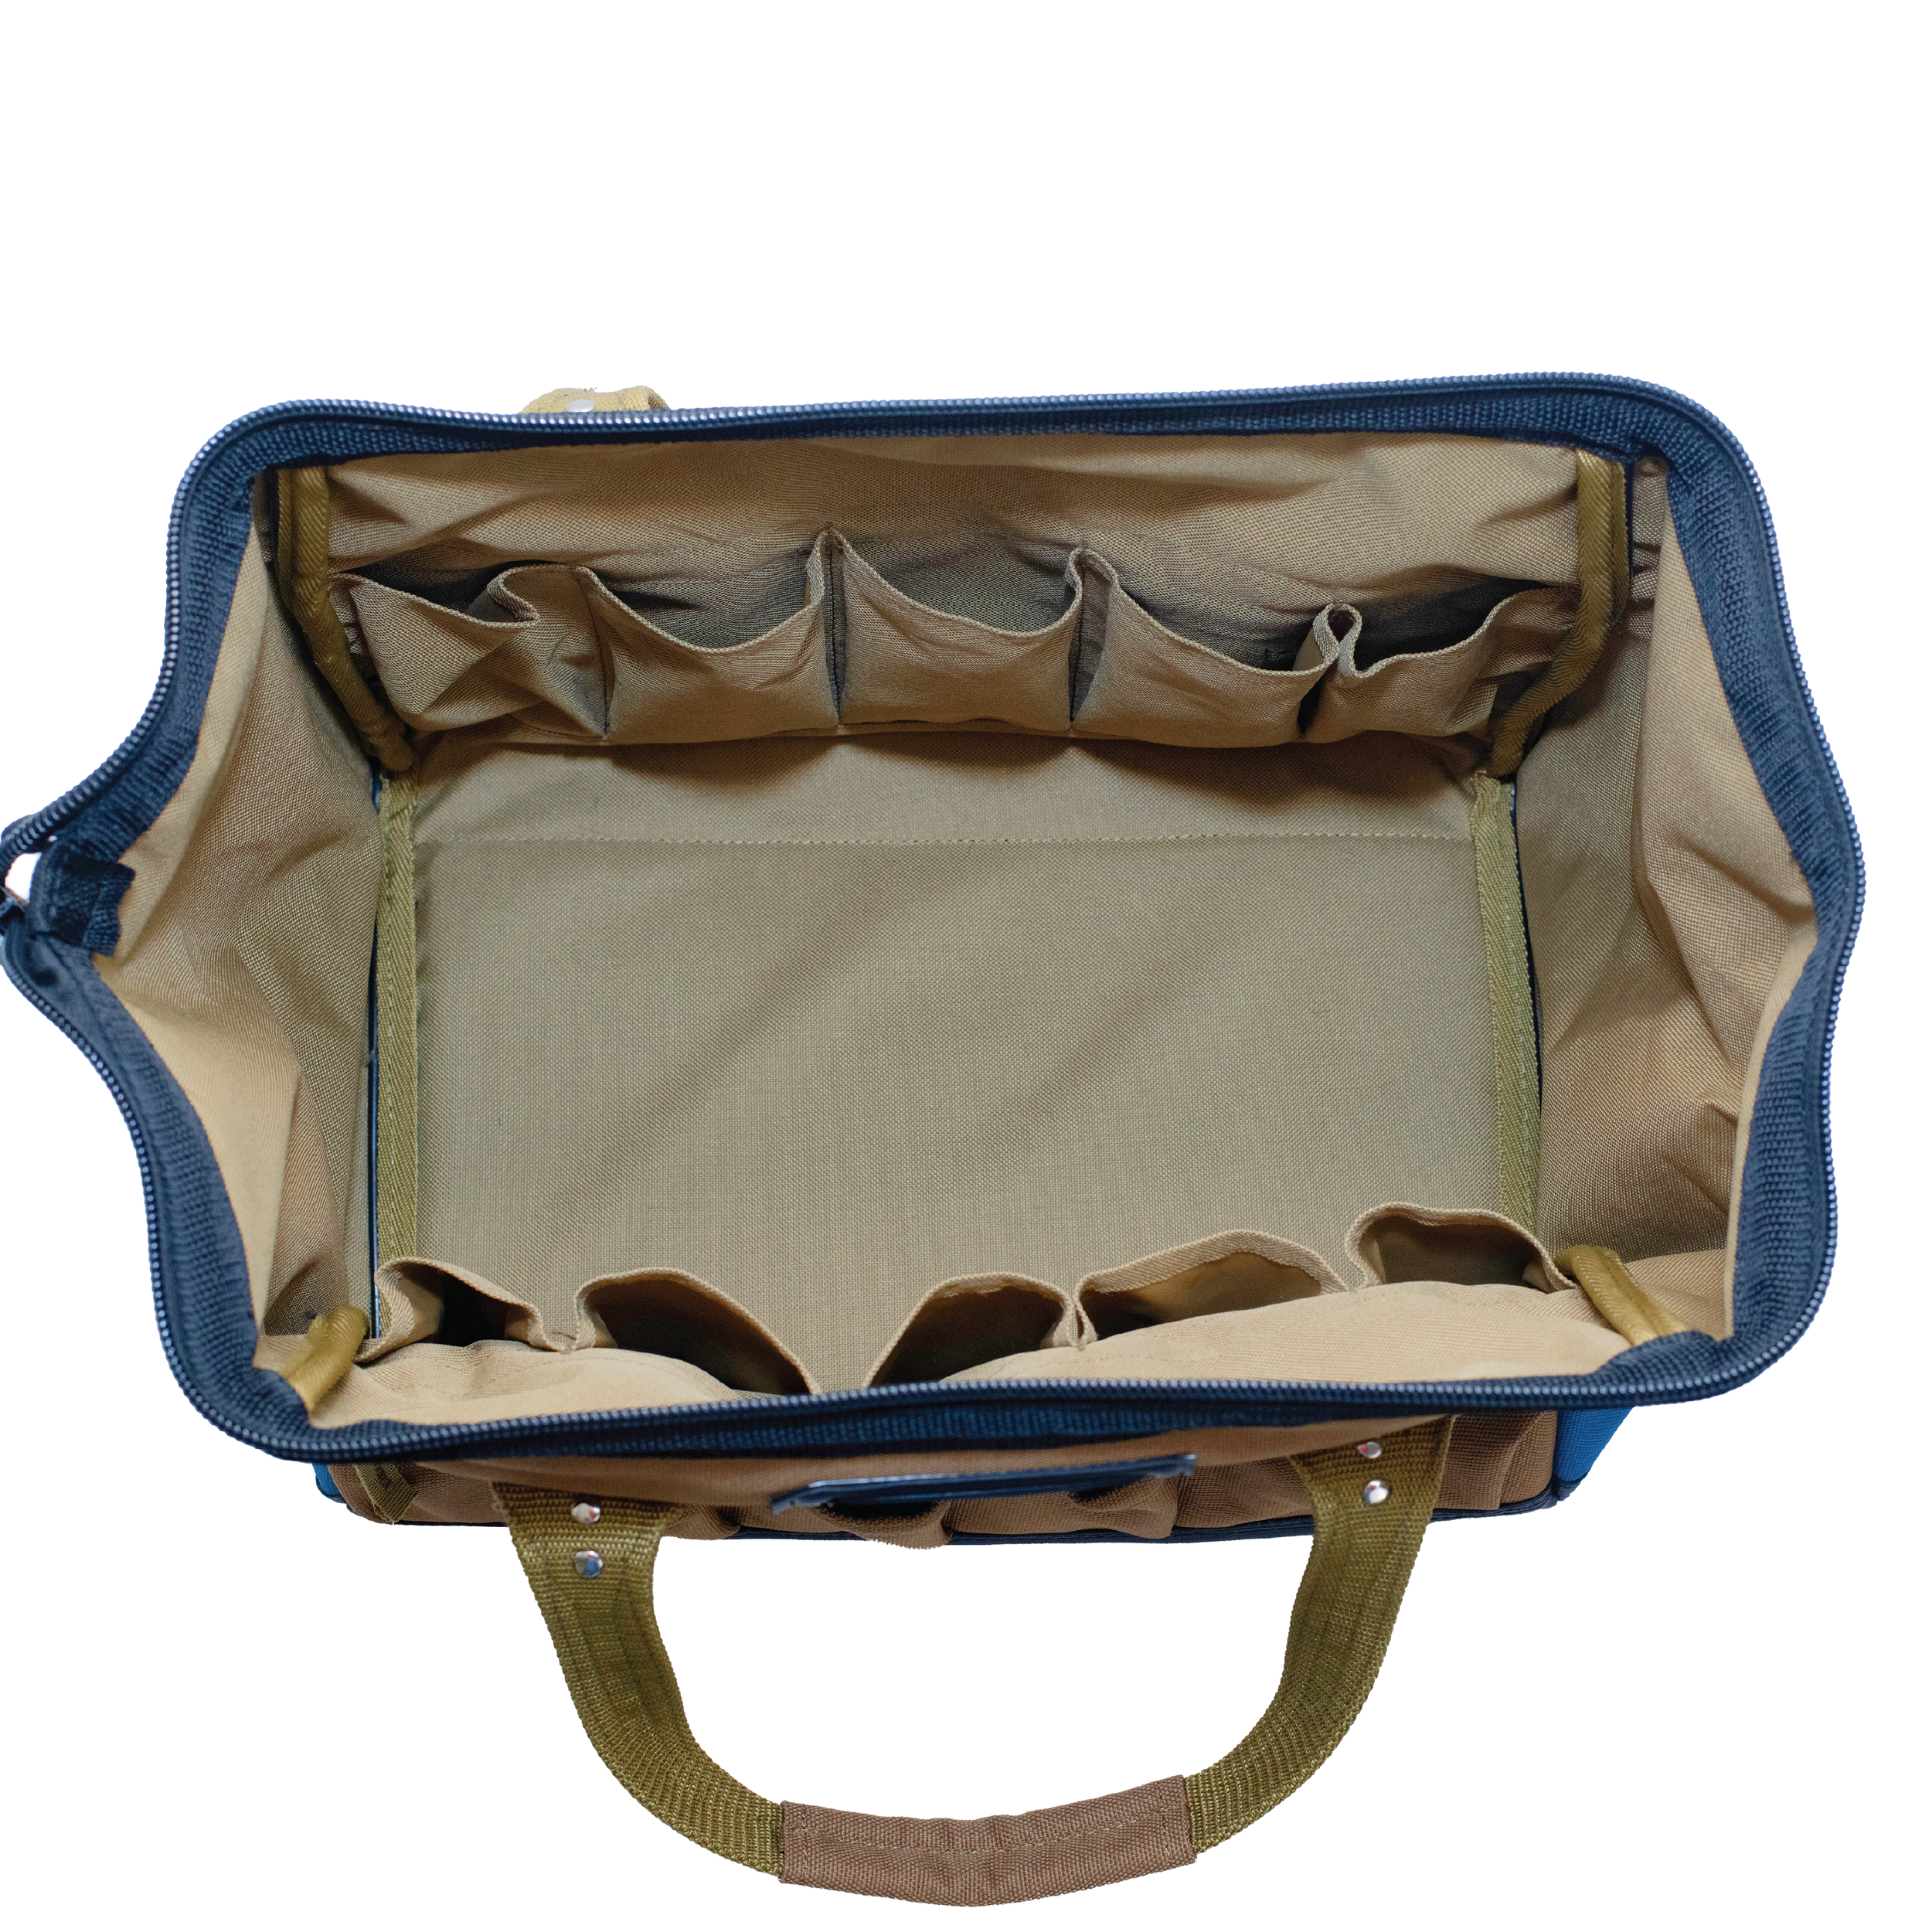 Rugged Tools Wide-Mouth Tool Bag Listing6.png